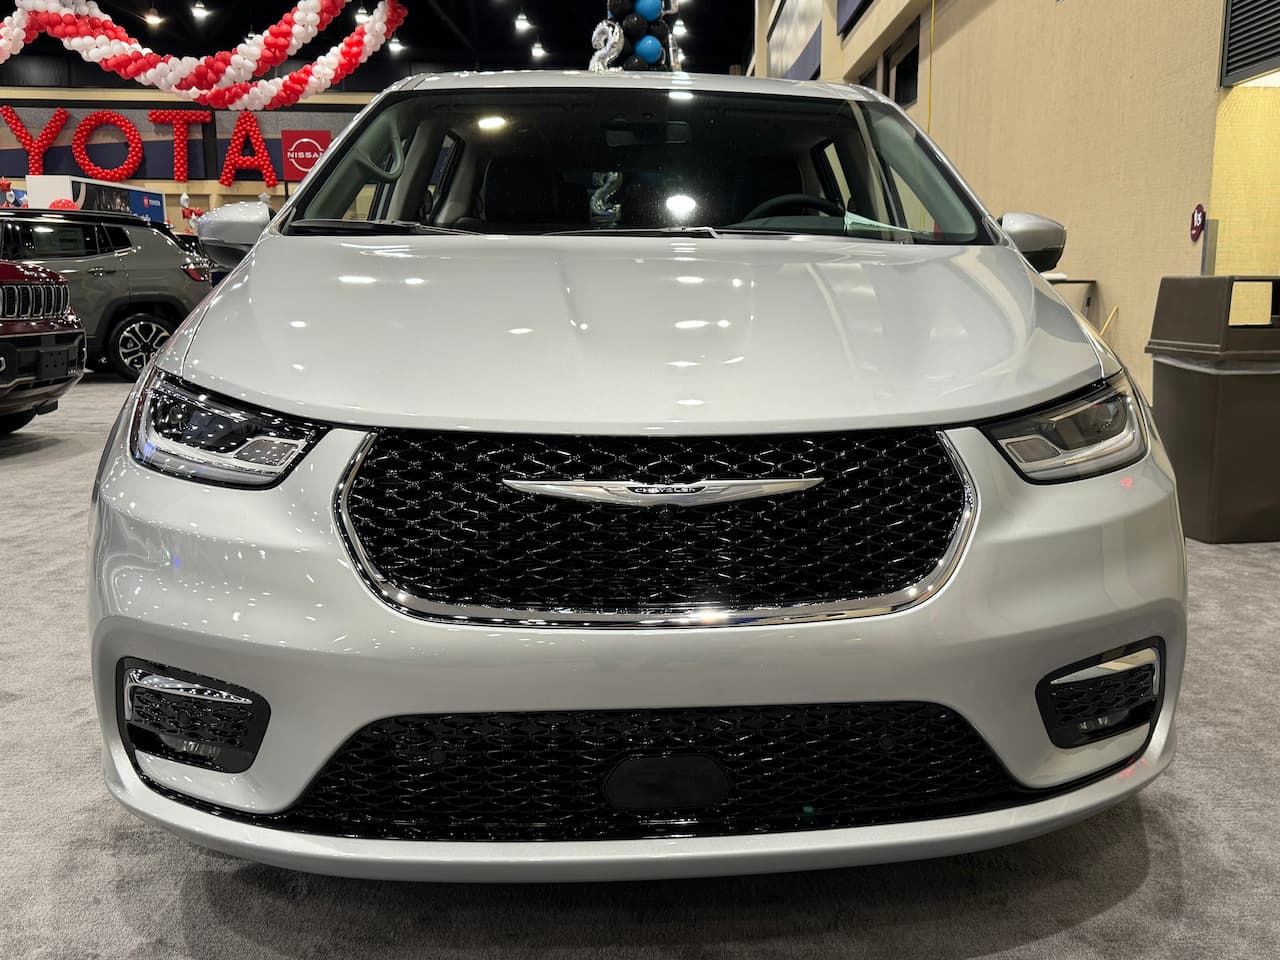 Chrysler Pacifica Hybrid front live image